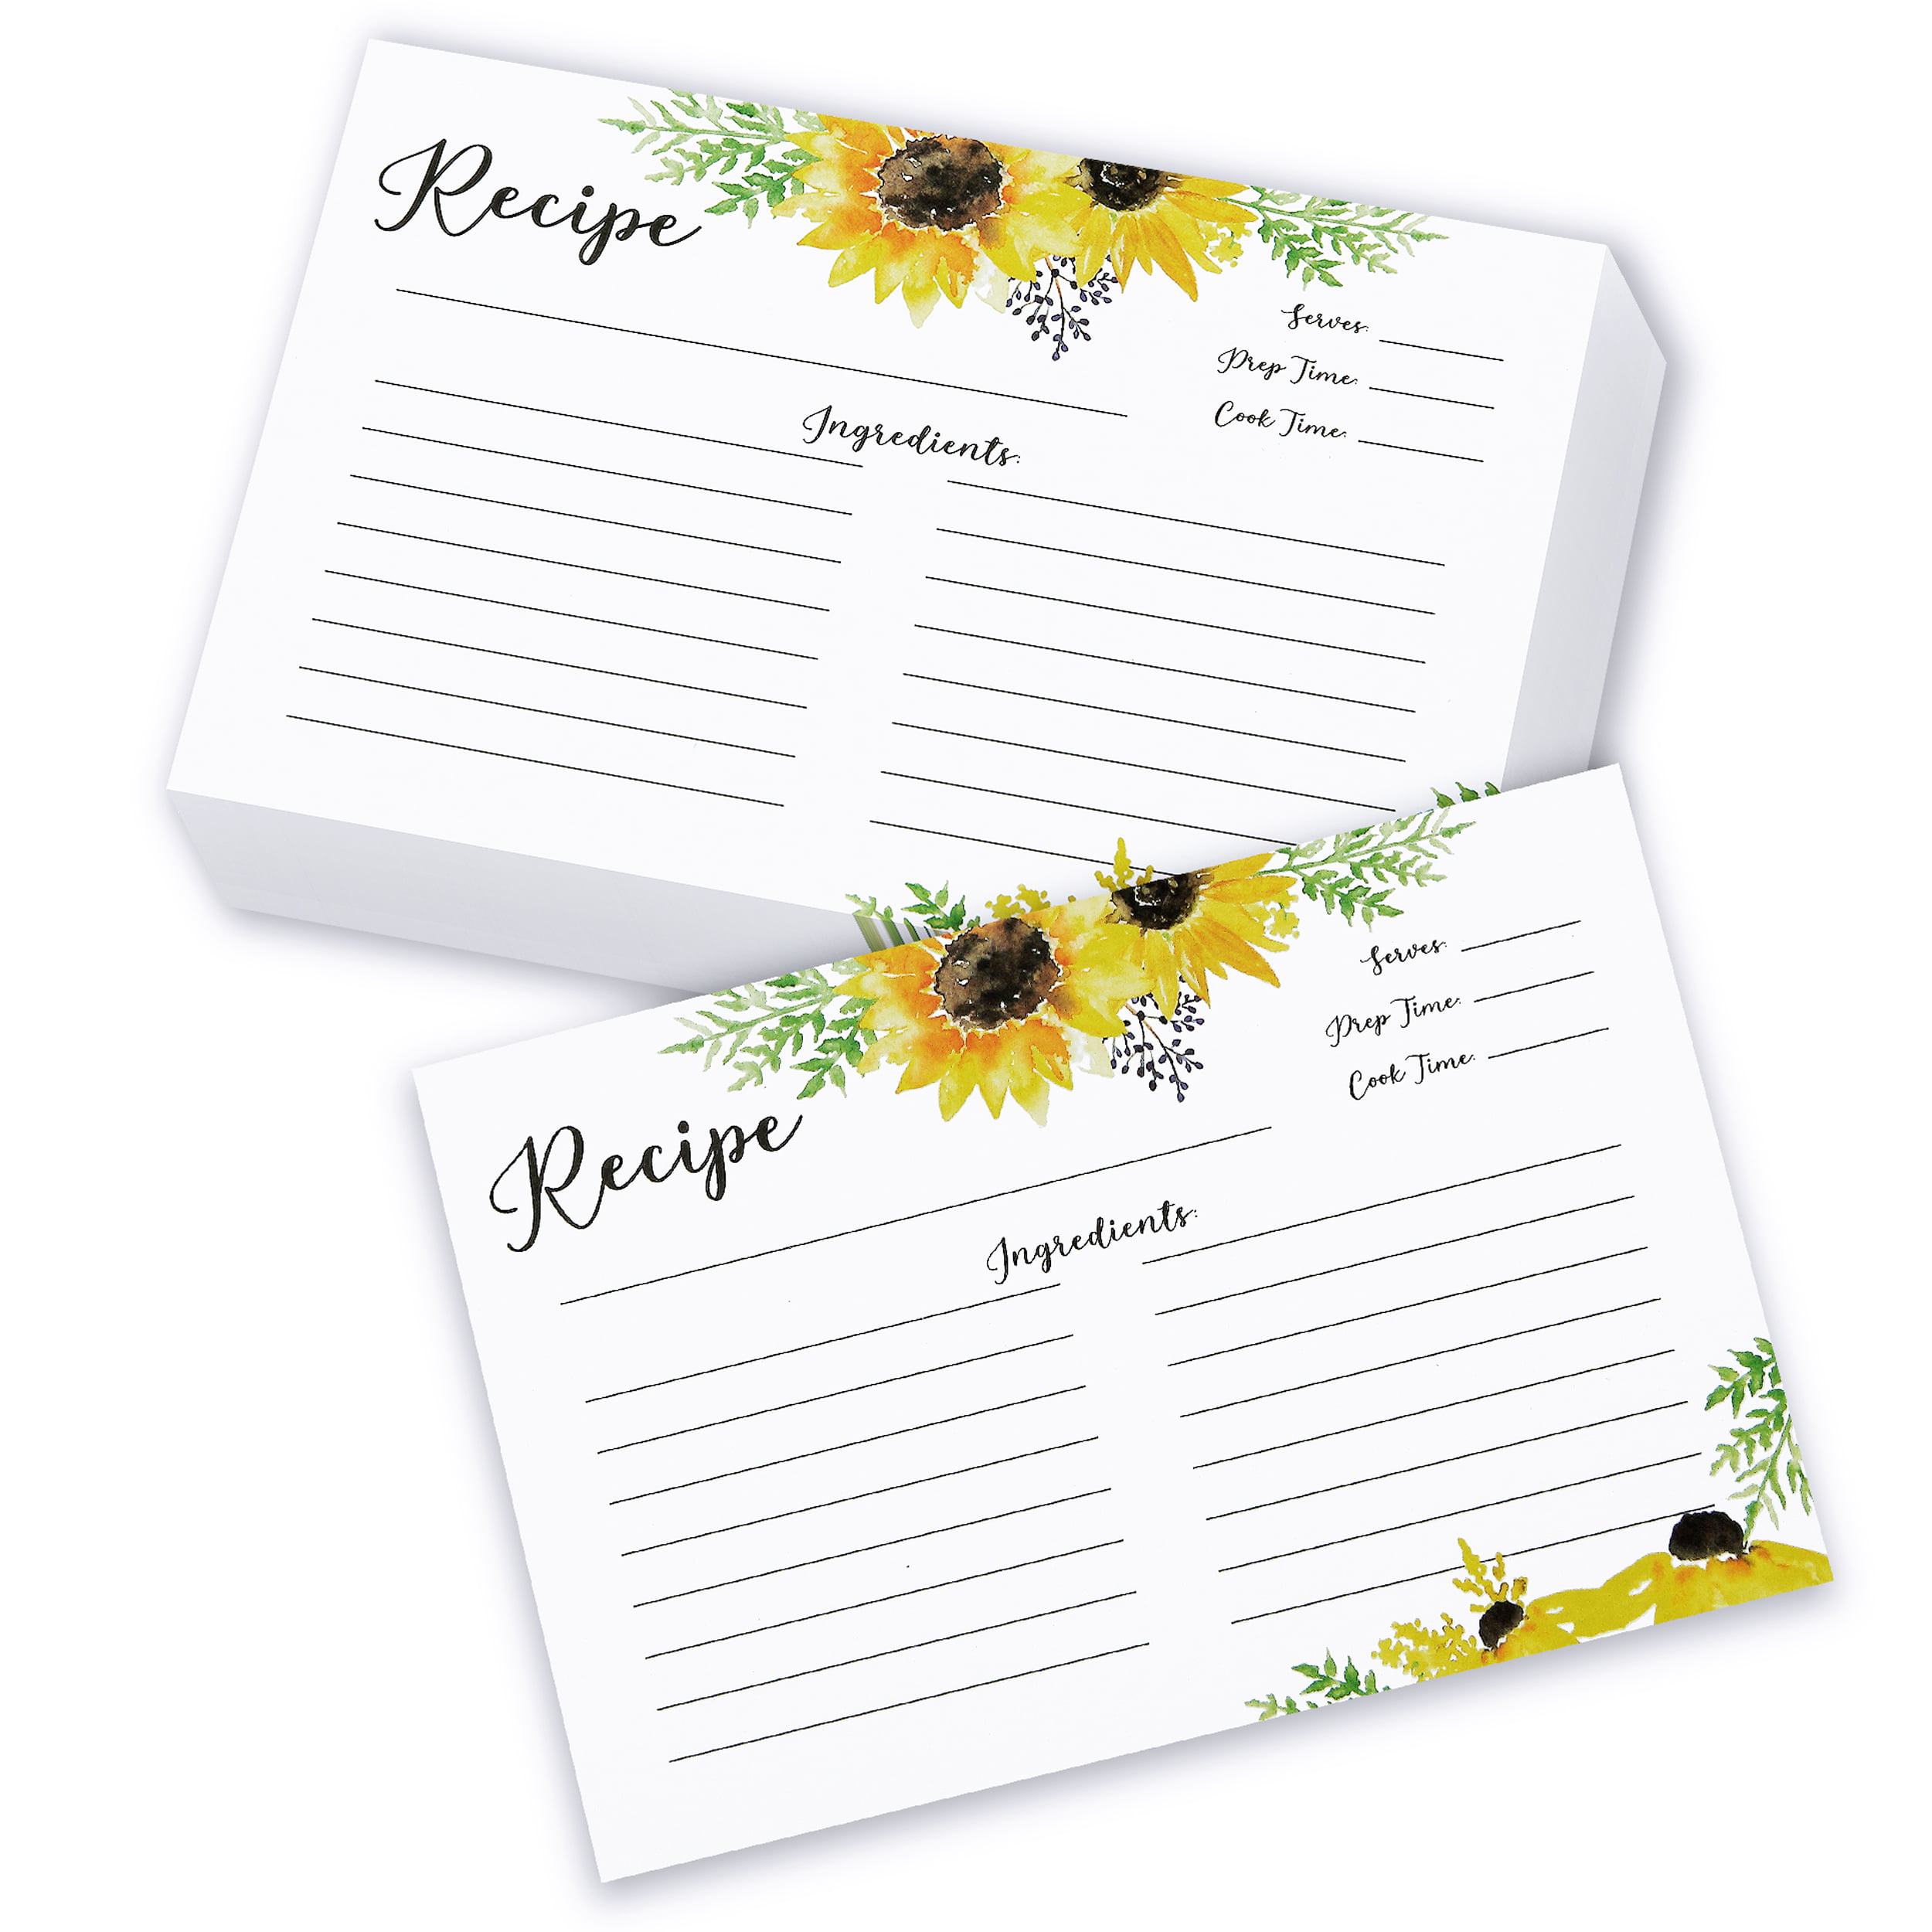 Thick Card Stock Paper 4x6 Double Sided Recipe Cards with Title Ingredients Cute Design Directions Bridal Shower Gift Idea Store or Share Recipes ● Wedding Bulk